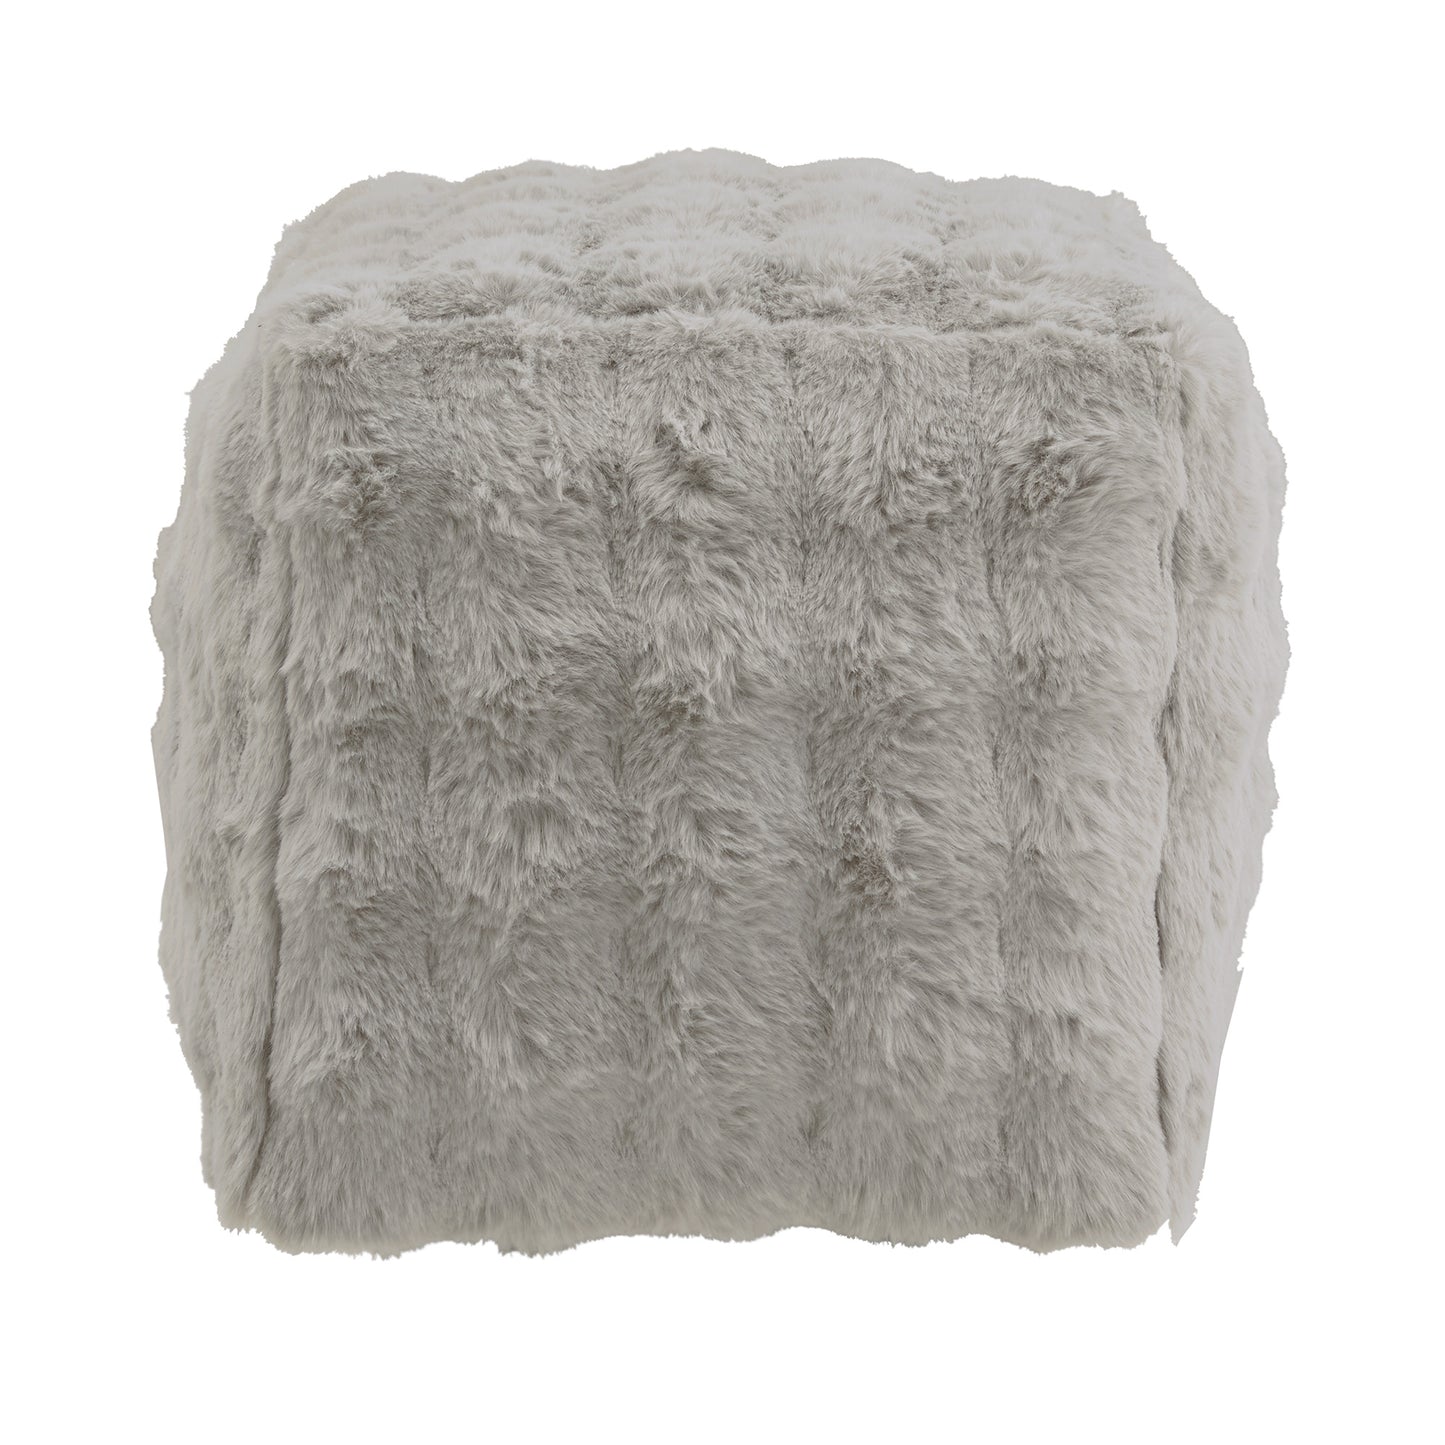 Upholstered Square Pouf Ottoman - Grey Square Furry Fabric